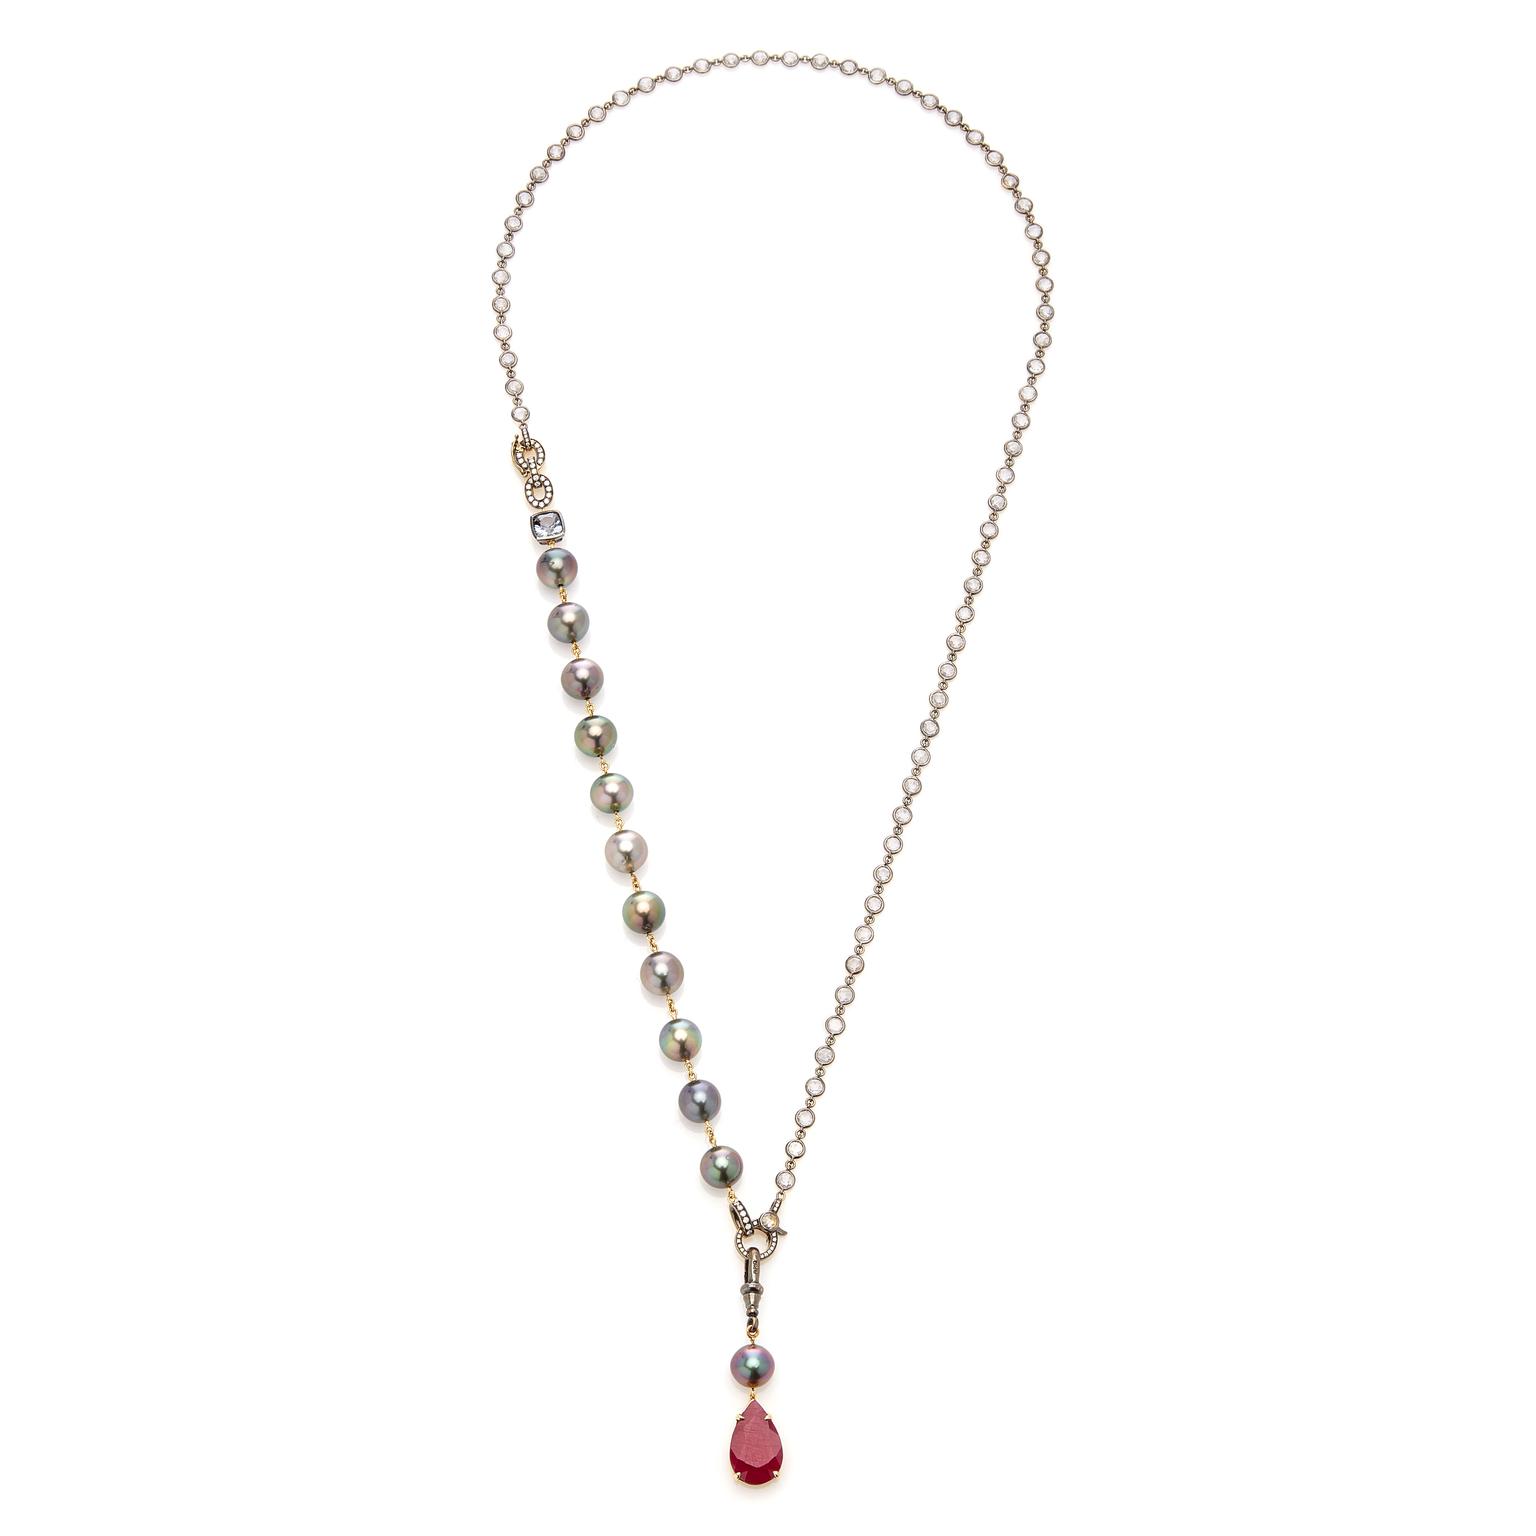 Mr Lieou necklace with pearls and tourmaline